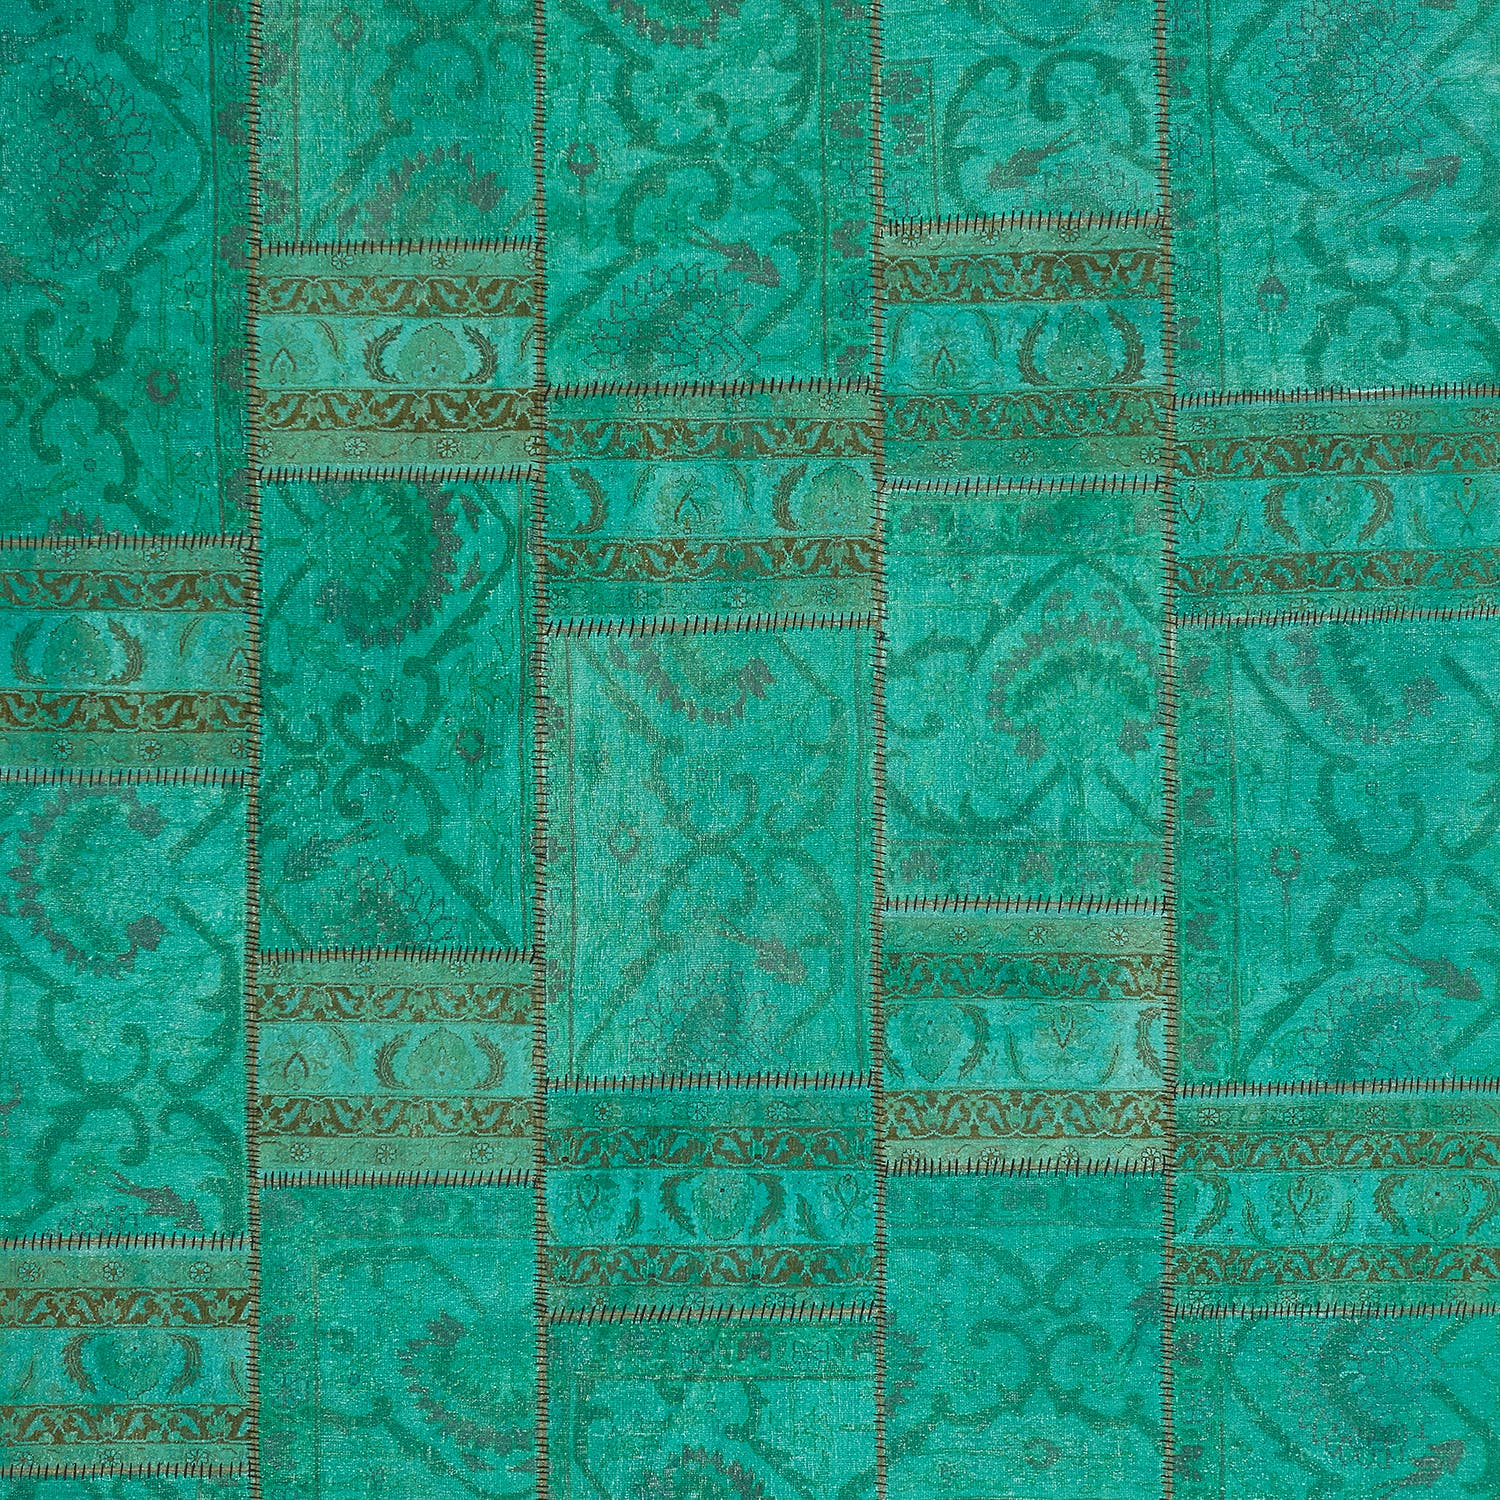 Elegant teal textile with ornate patterns and vintage aesthetic.